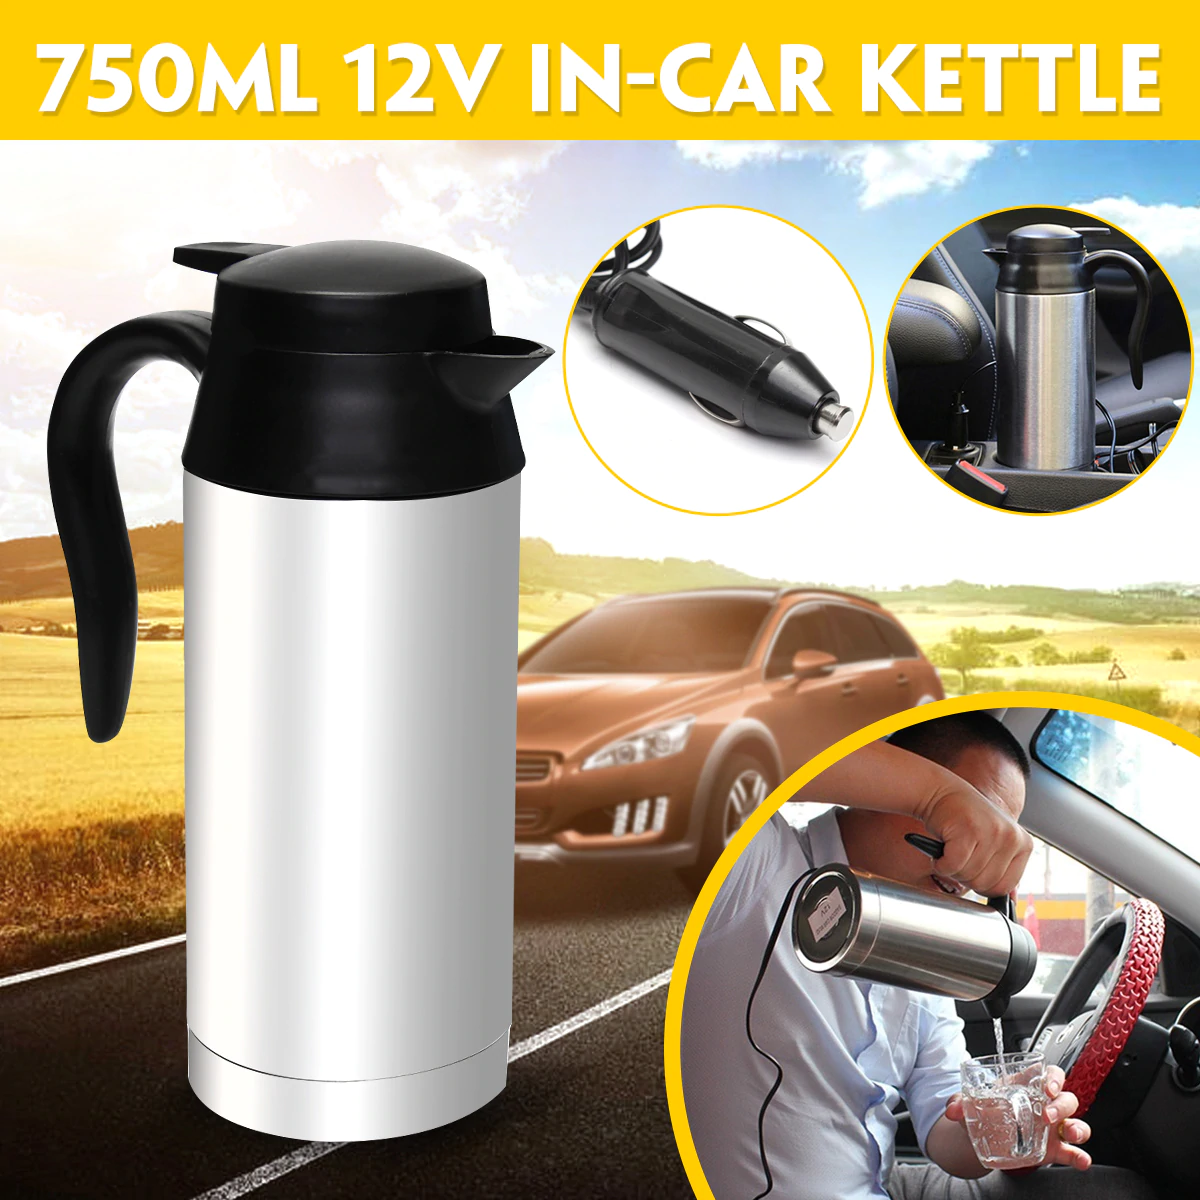 12V Electric Kettle 750ml Stainless Steel In-Car